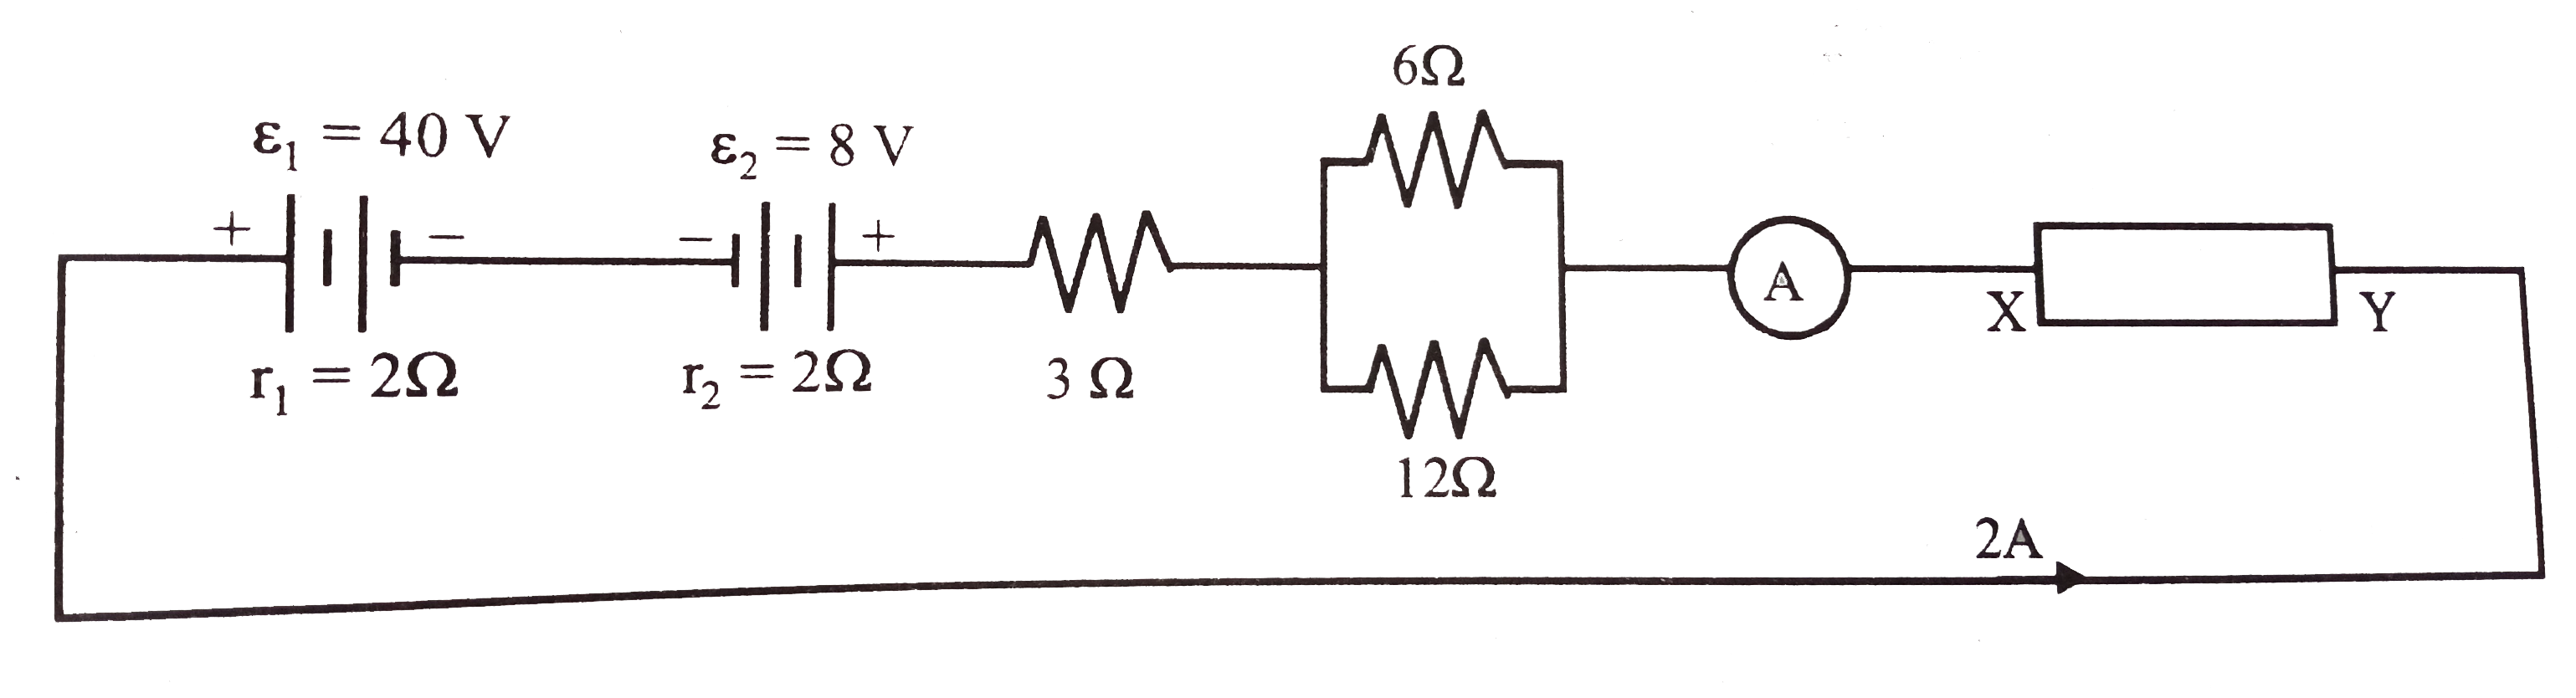 In the circuit shown the ammeter 'A' reads 2A. XY is a circuit which can either be a resistance of a battery. In the direction of the current there will always be a potential drop across the resistance. Reagarding battery you have to remember that the potential difference across its terminals can be more than its emf or less depending upon whether the battery is delivering the current, or is being charged in the circuit      Assuming XY to be a resistor, its value is: